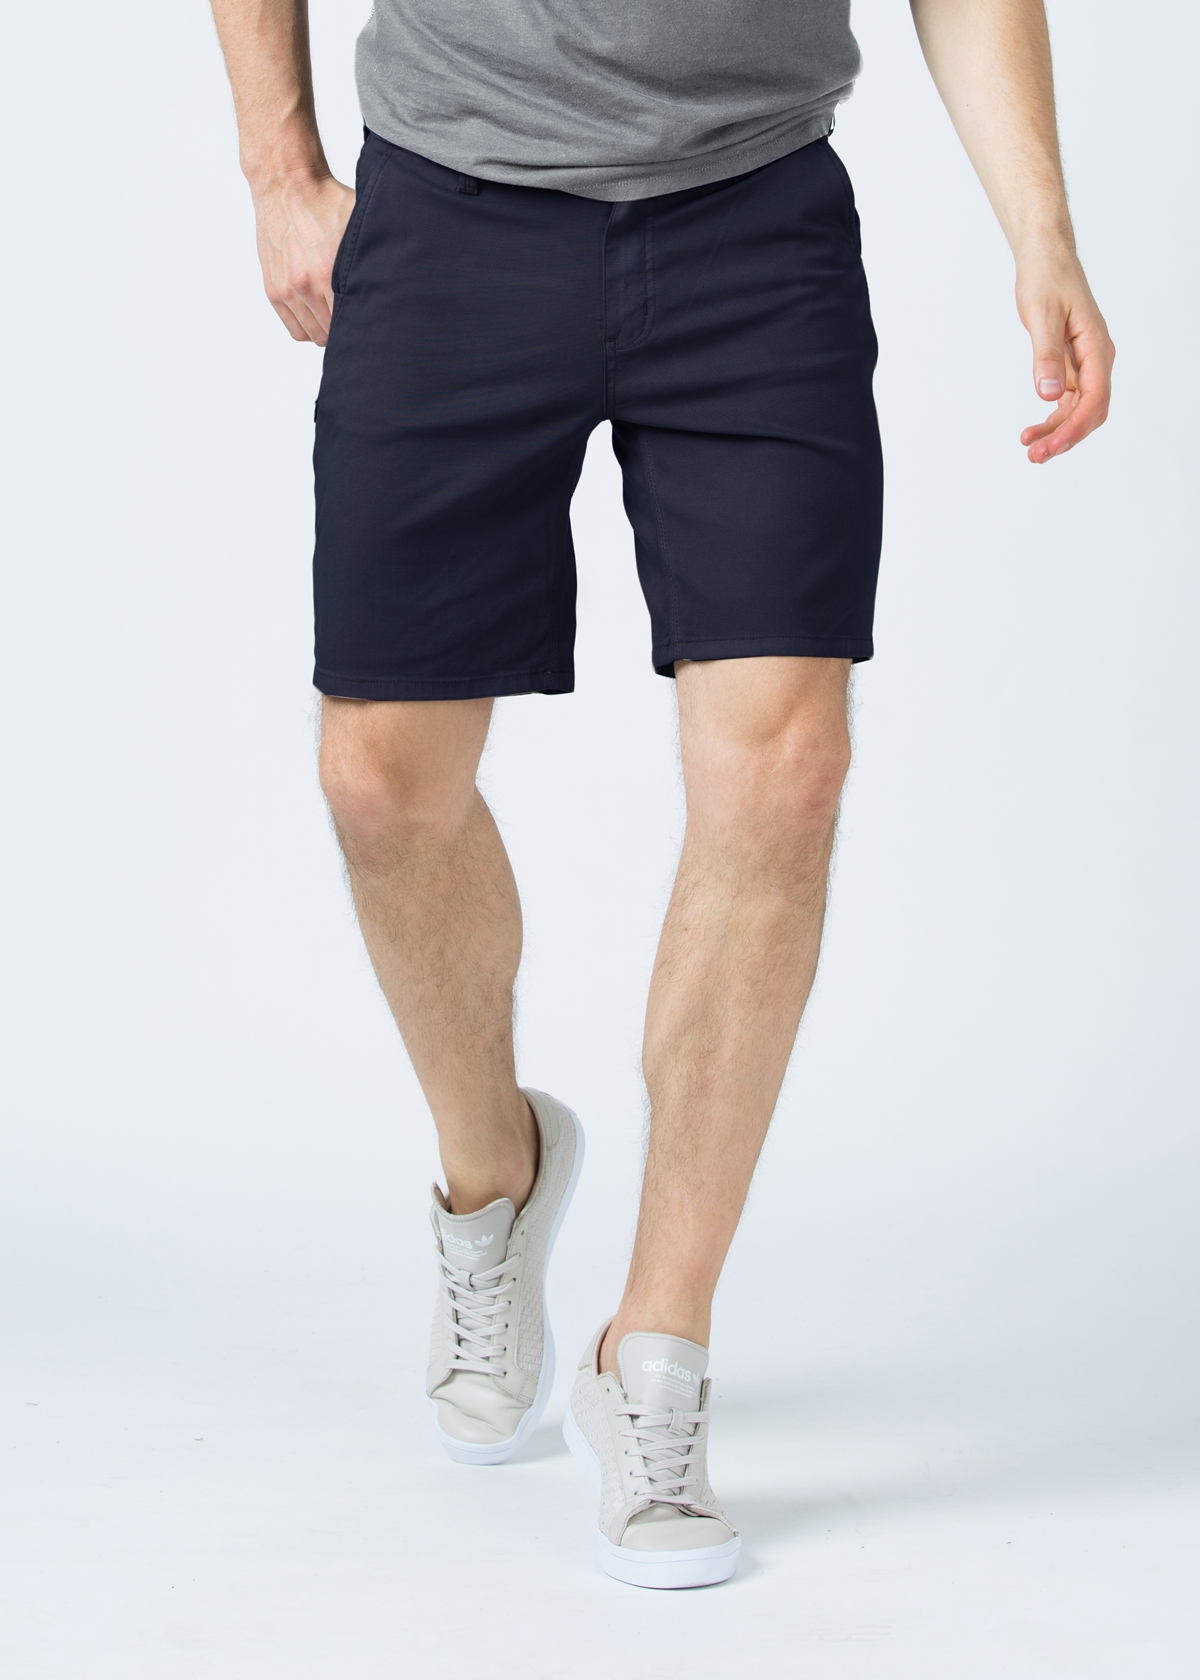 PRE-SALE: NEW DUER LIVE LITE “HOT WEATHER PANTS - SWAGGER Magazine